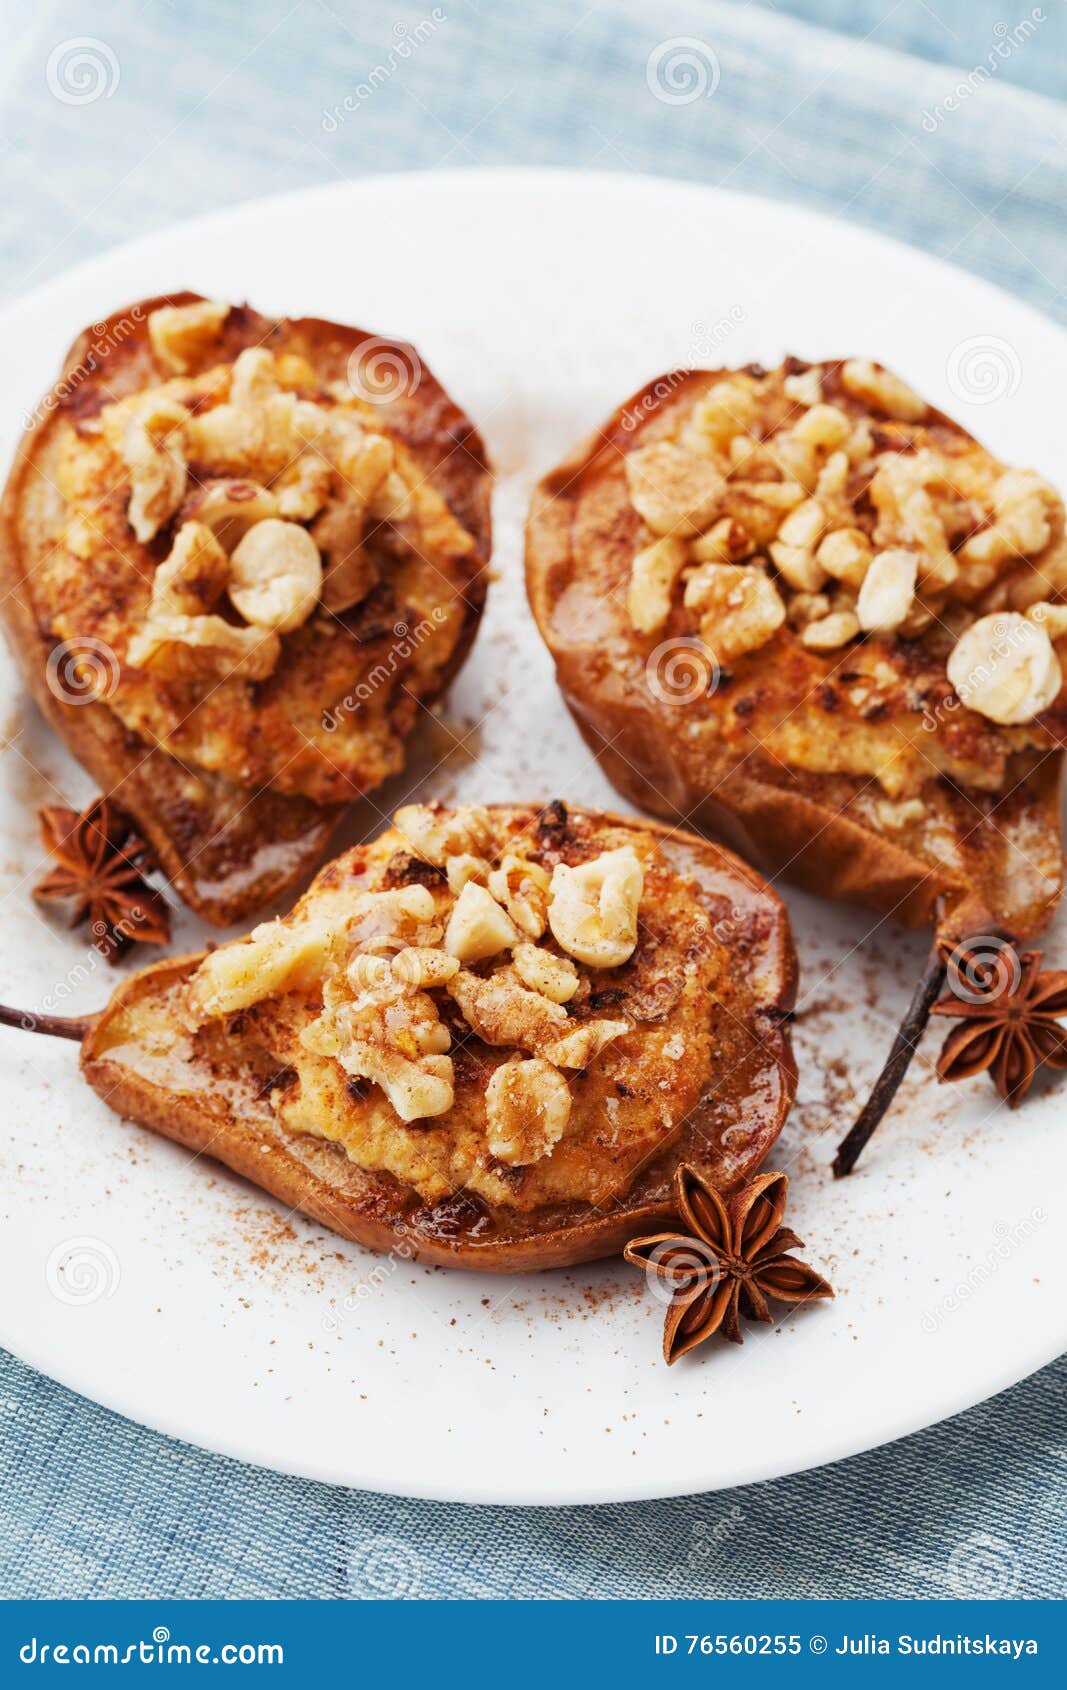 Baked Pears with Ricotta, Walnuts, Honey and Cinnamon in a White Plate ...